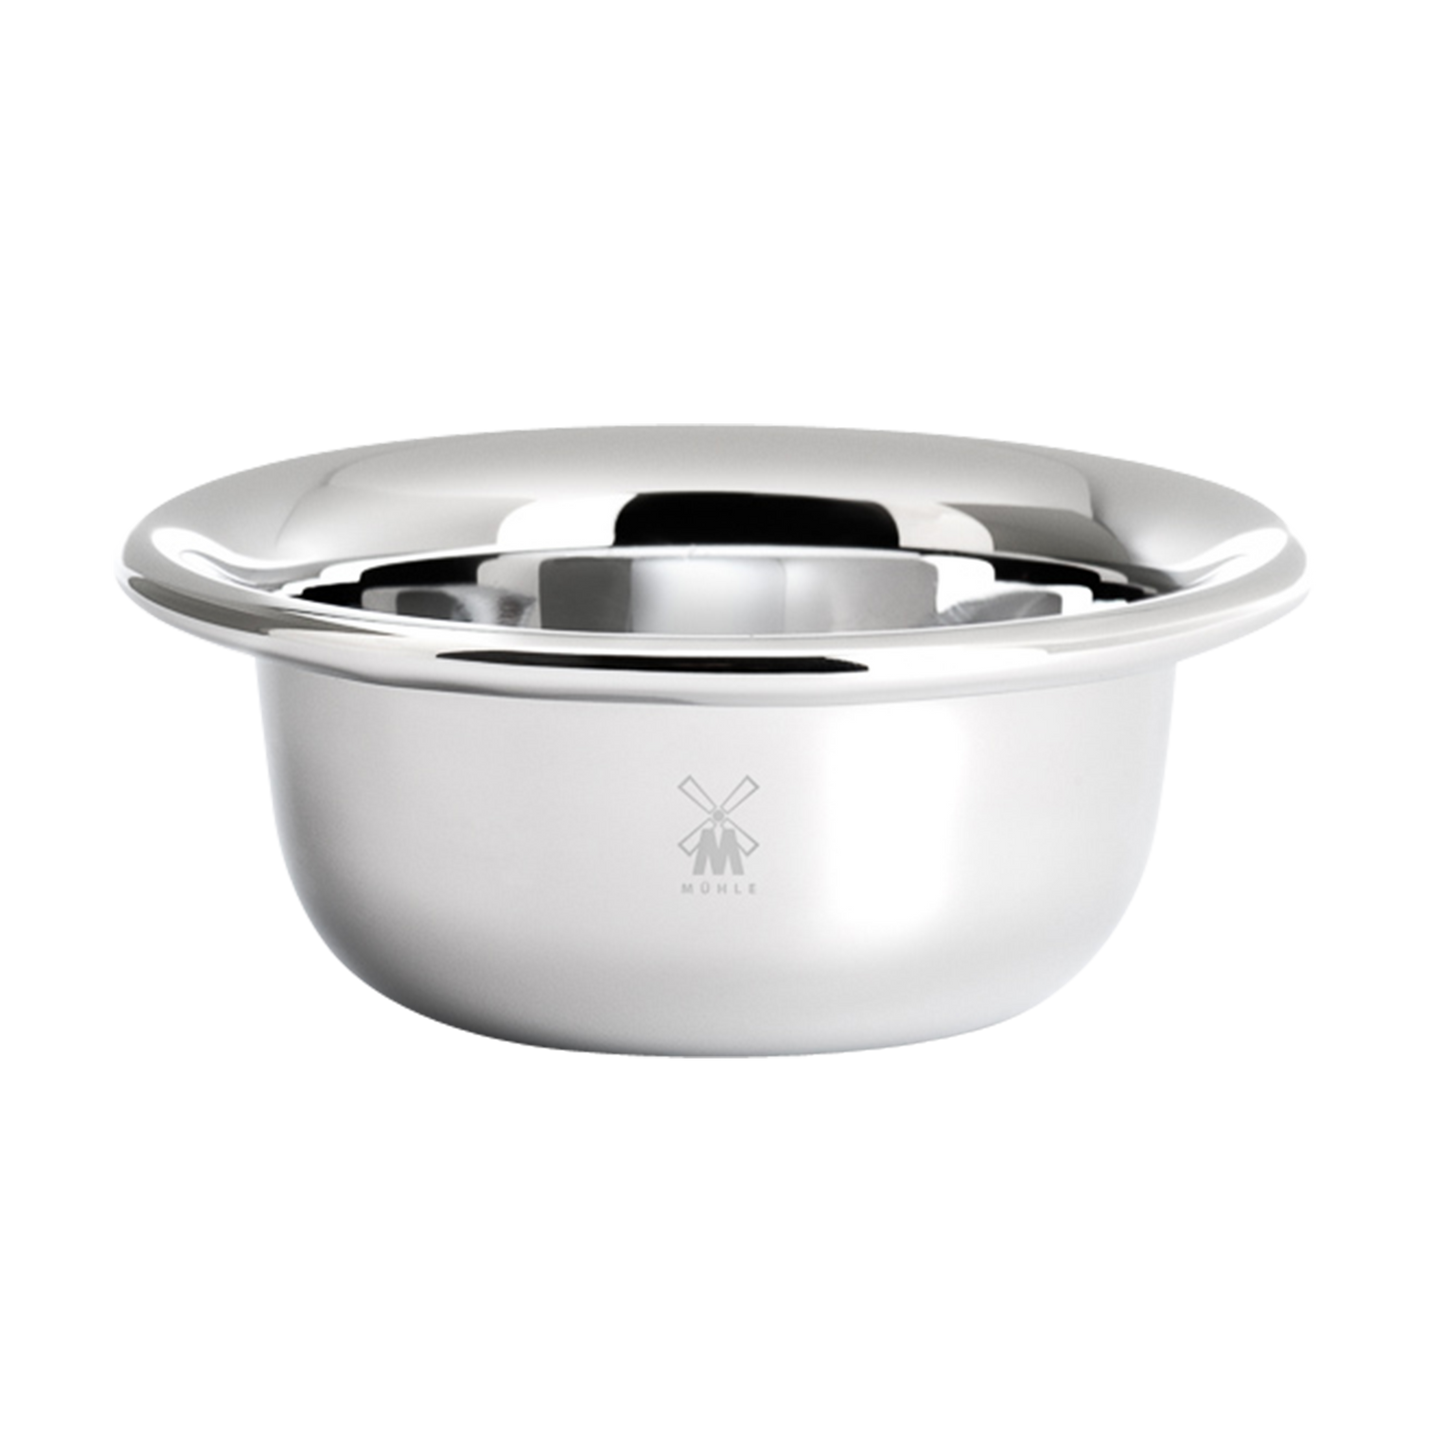 MUHLE Soap Dish in Chrome Plated Stainless Steel: Stainless steel shaving bowl, chrome plated.